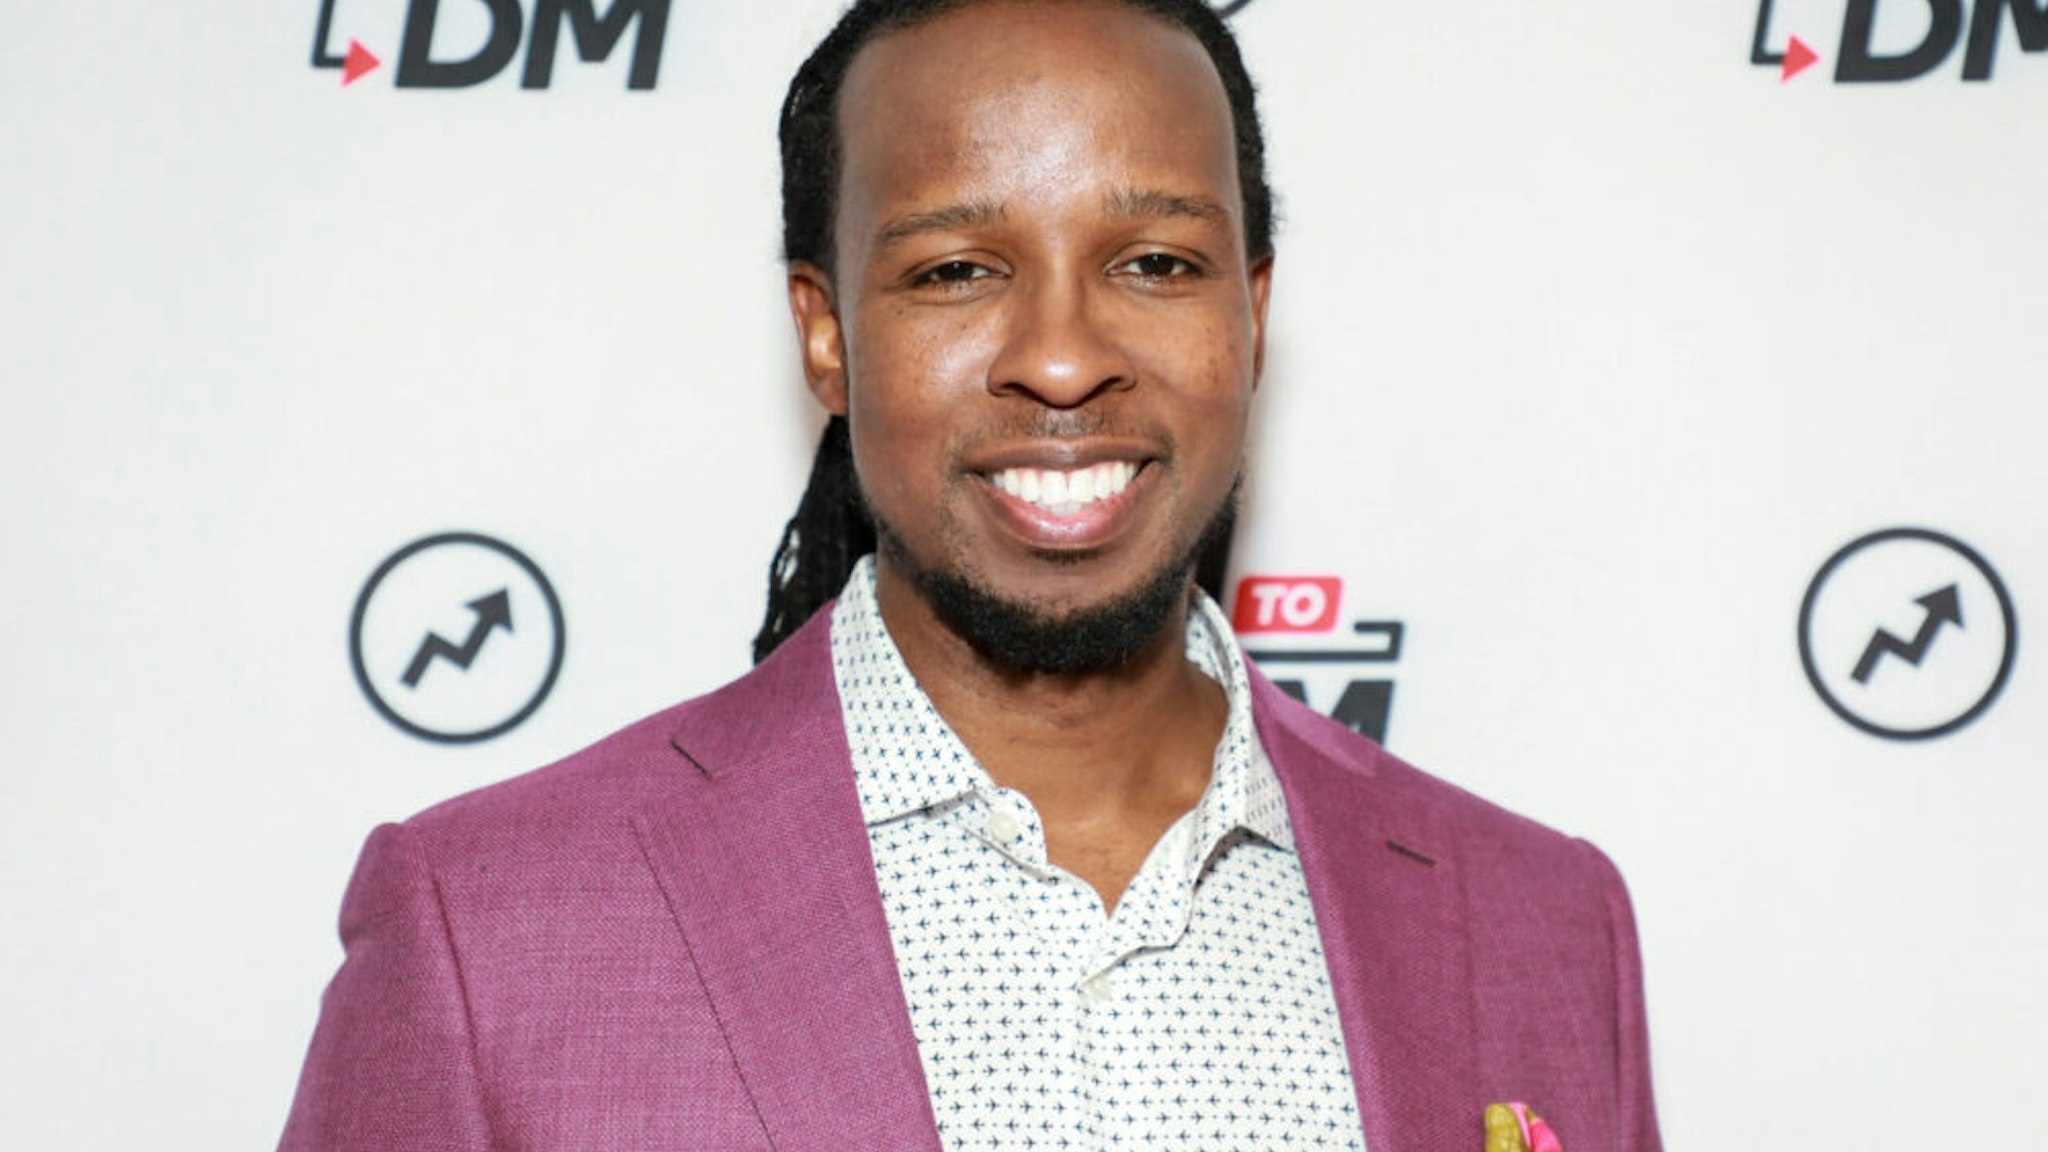 NEW YORK, NY - MARCH 10: (EXCLUSIVE COVERAGE) IBRAM X KENDI visits BuzzFeed's "AM To DM" on March 10, 2020 in New York City. (Photo by )